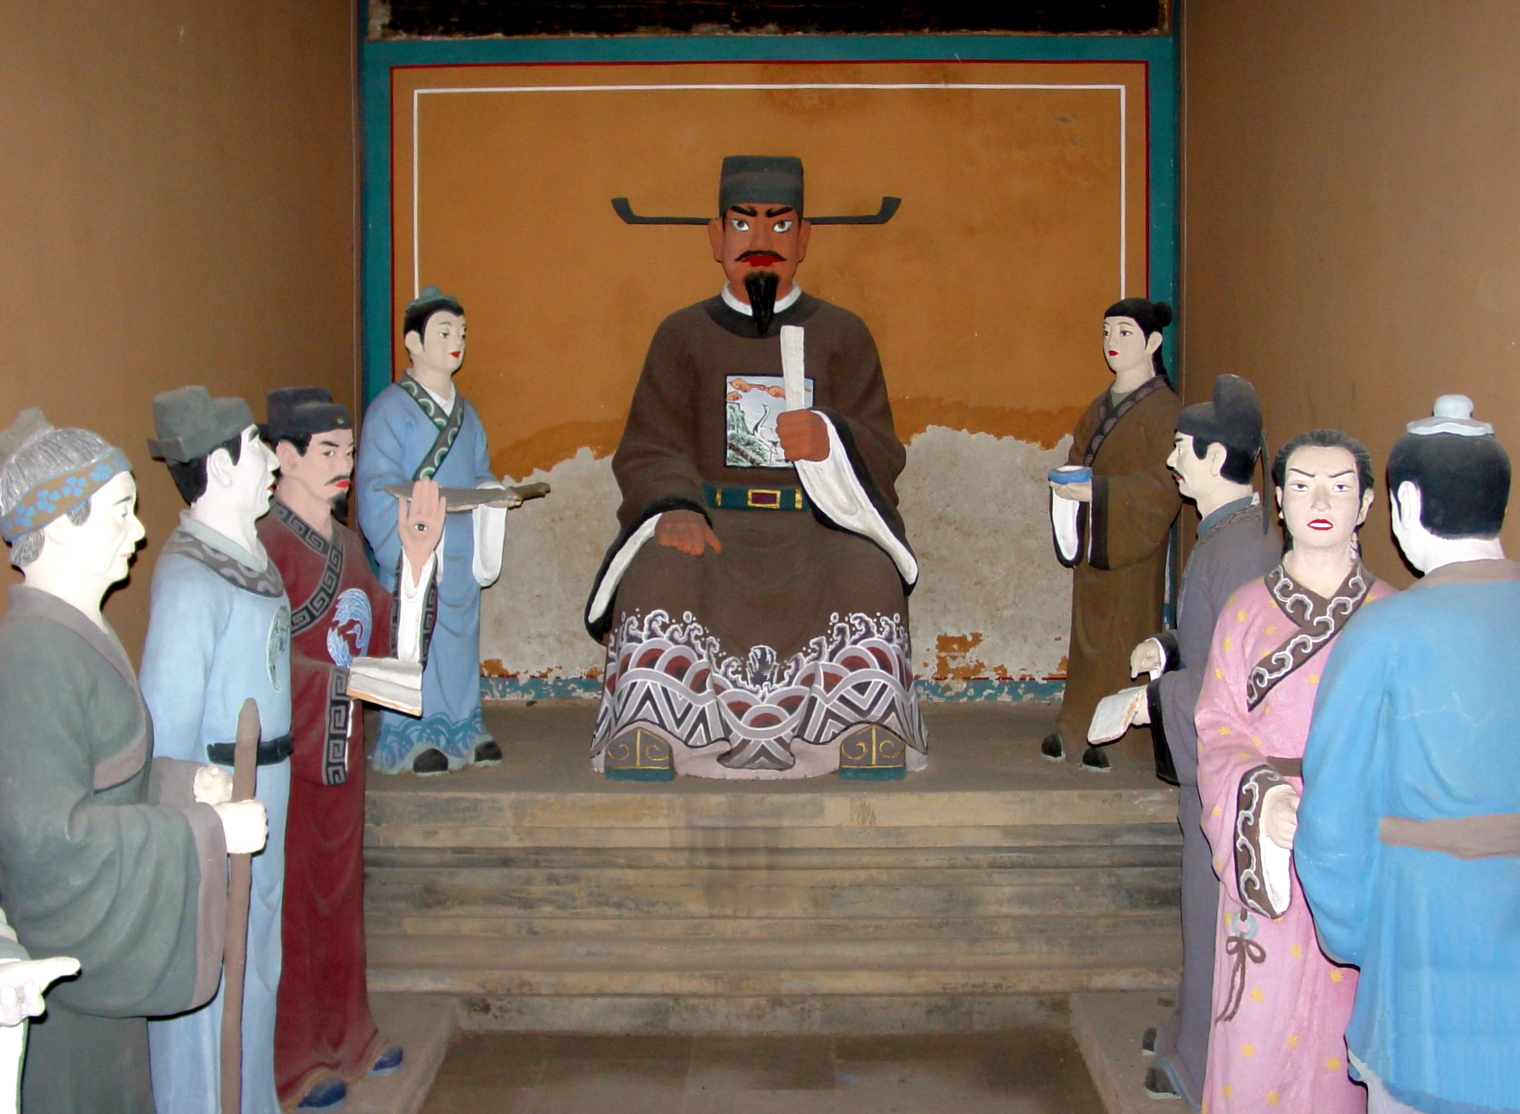 Museum model of social situation